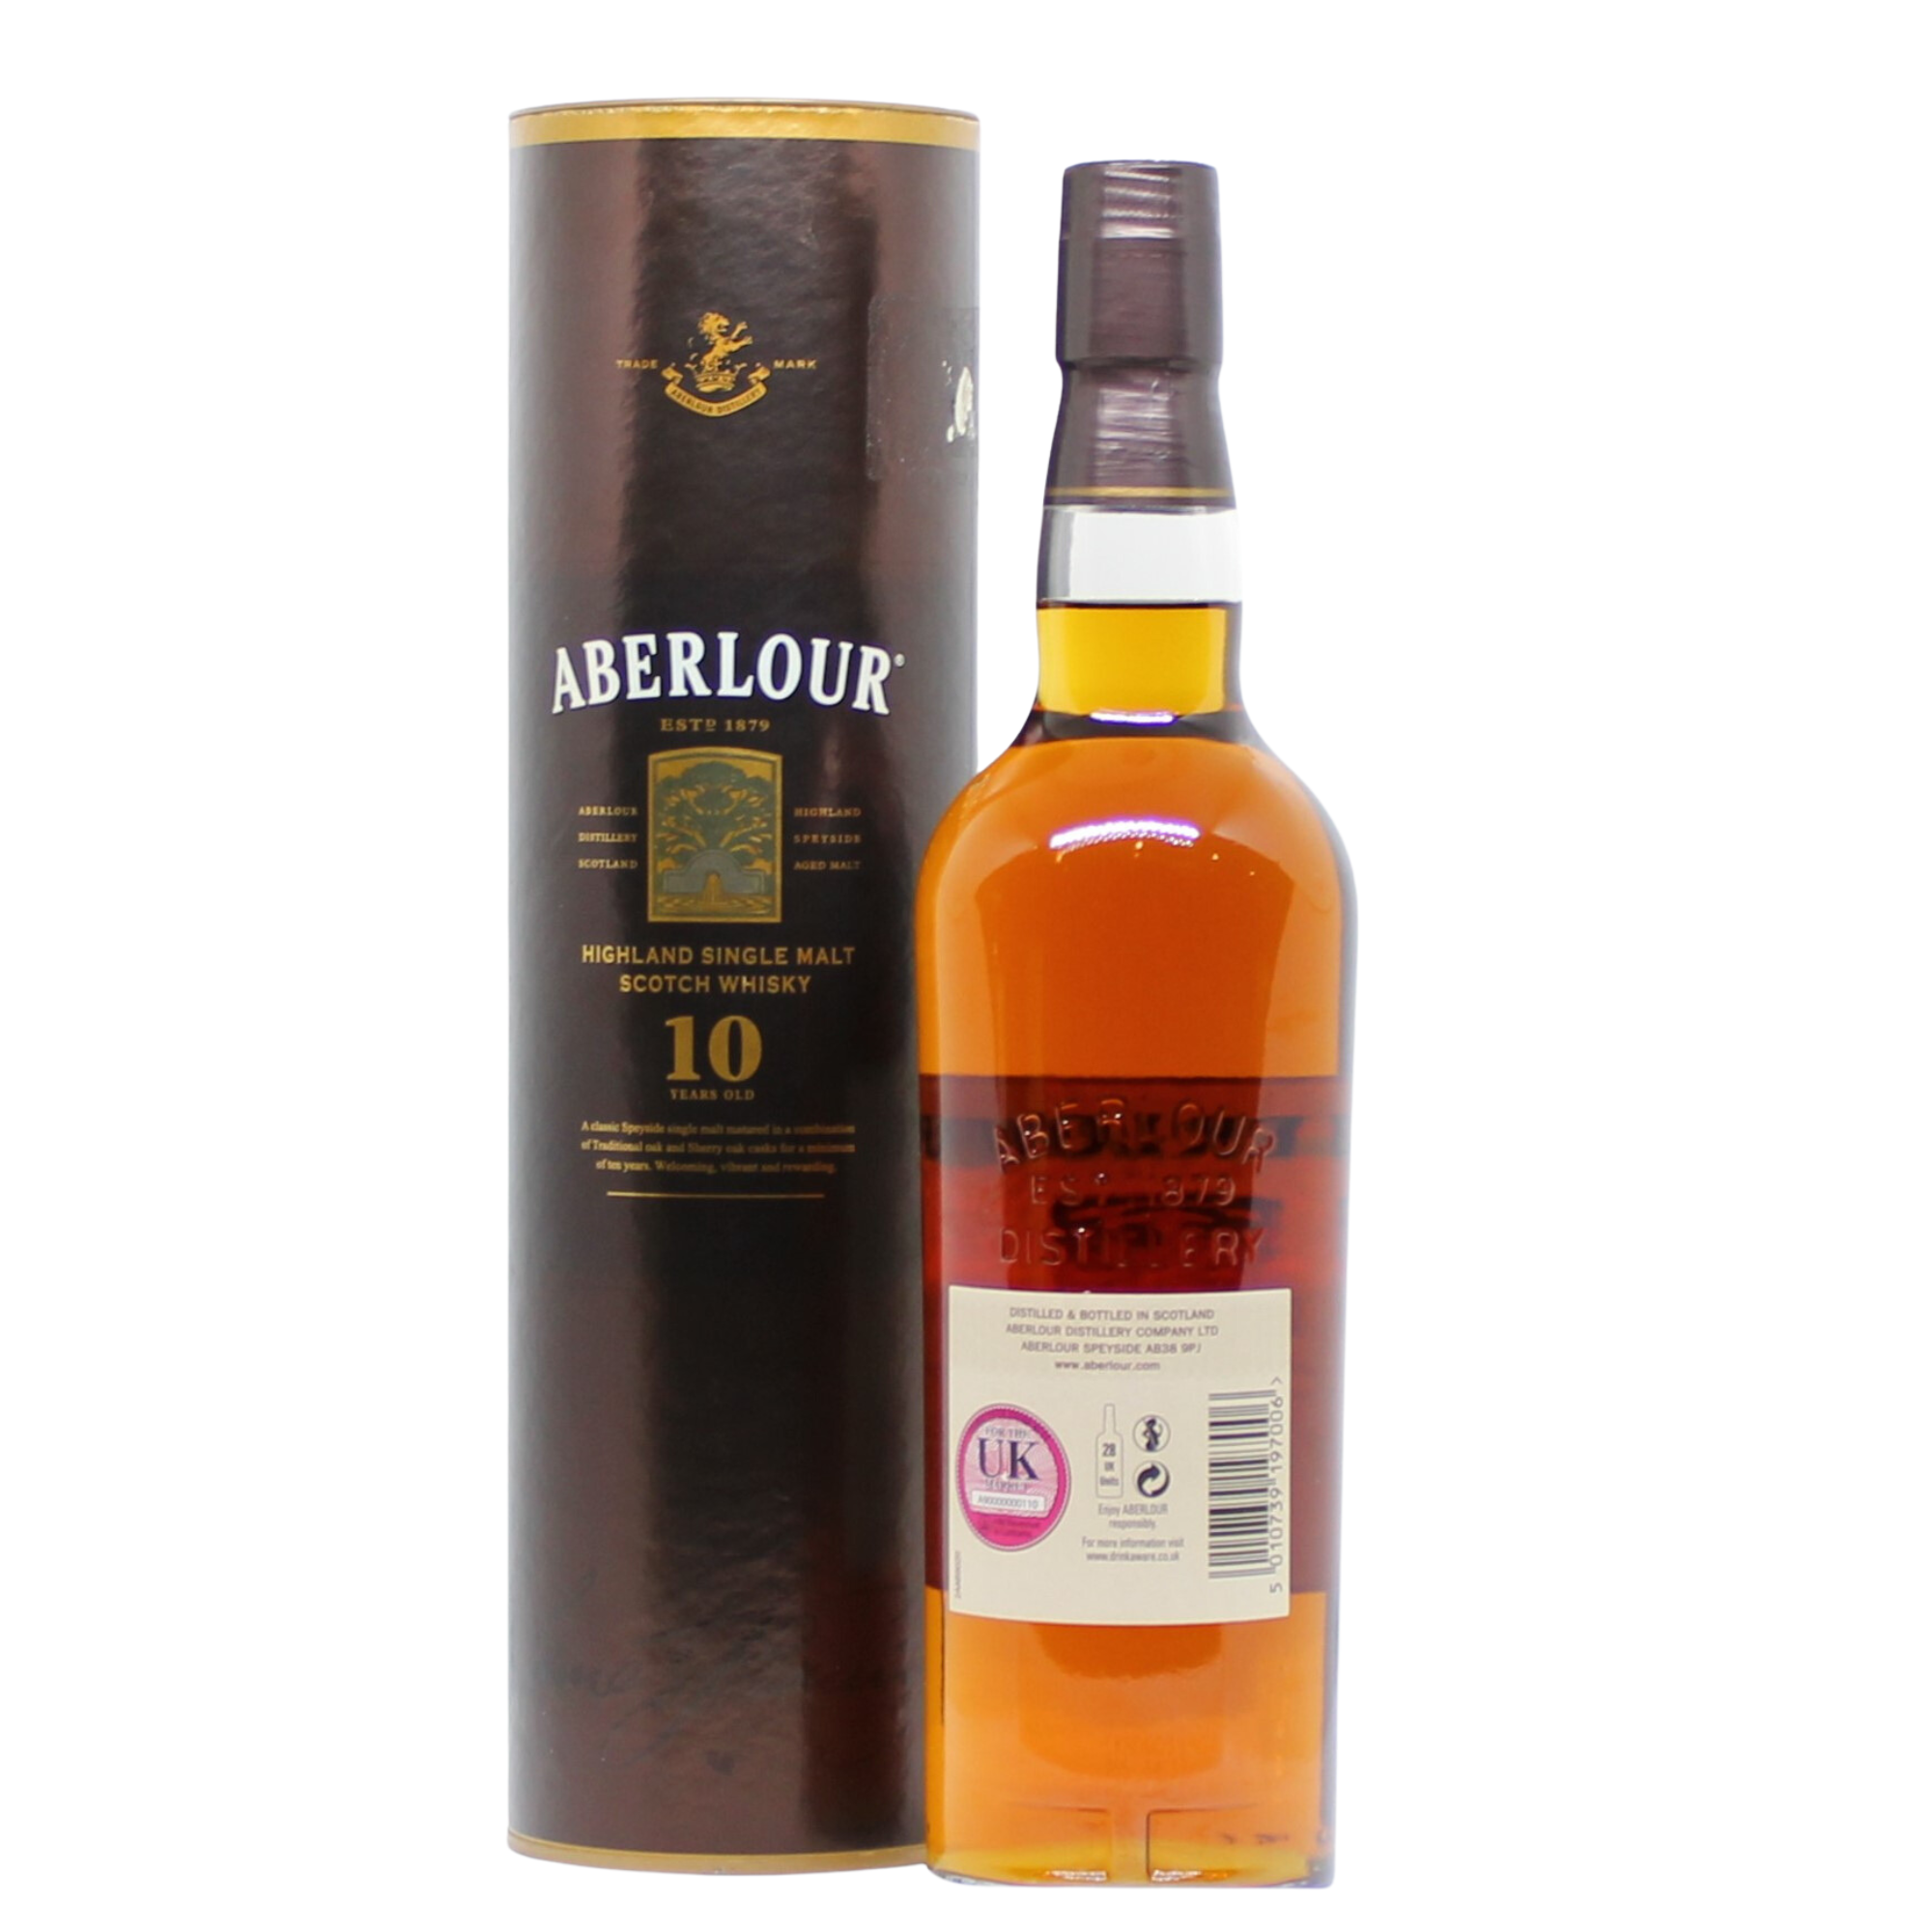 A 10-year-old single malt from Aberlour, Forest Reserve was matured in a combination of bourbon and sherry casks before being finished in French Limousin oak casks. Aromas of lemon blossom, orange peel, strawberry jam, vanilla and fresh, spicy oak fill the nose. The palate offers notes of sweet melon, toffee, walnuts, raisins, vanilla and dried herbs.